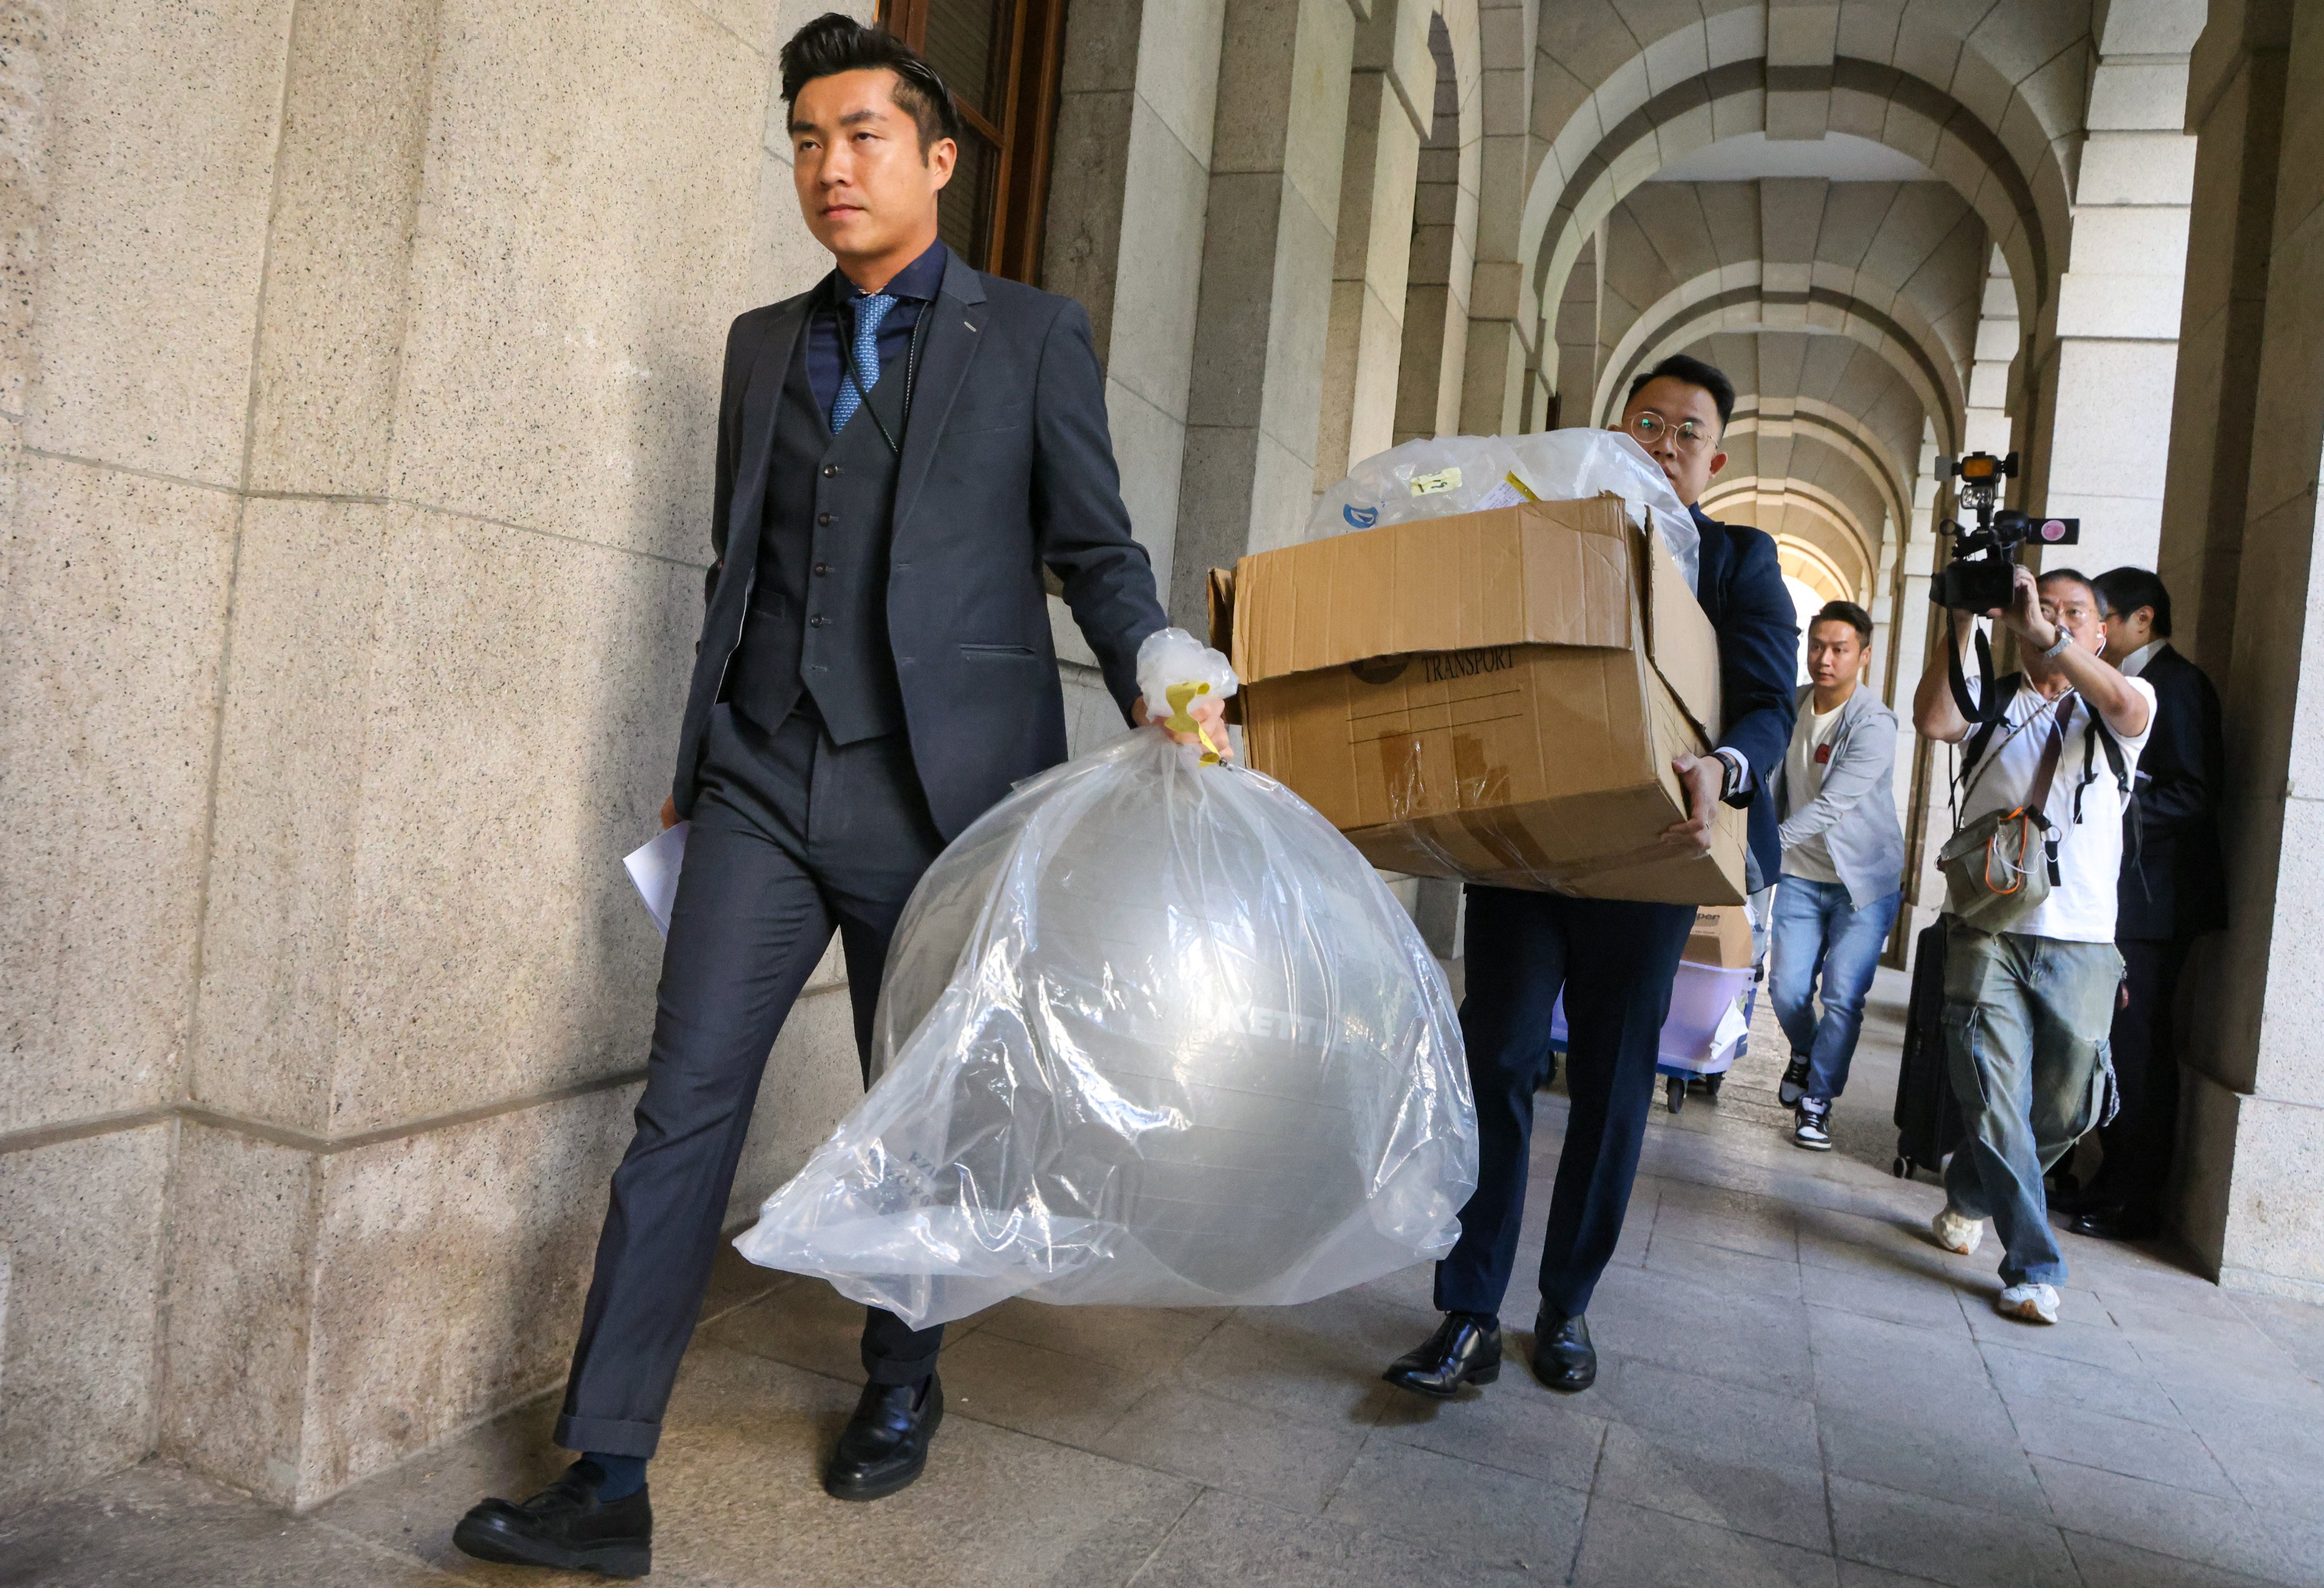 Police carrying the evidence related to the case out of the court after the ruling was declared. Photo: Dickson Lee